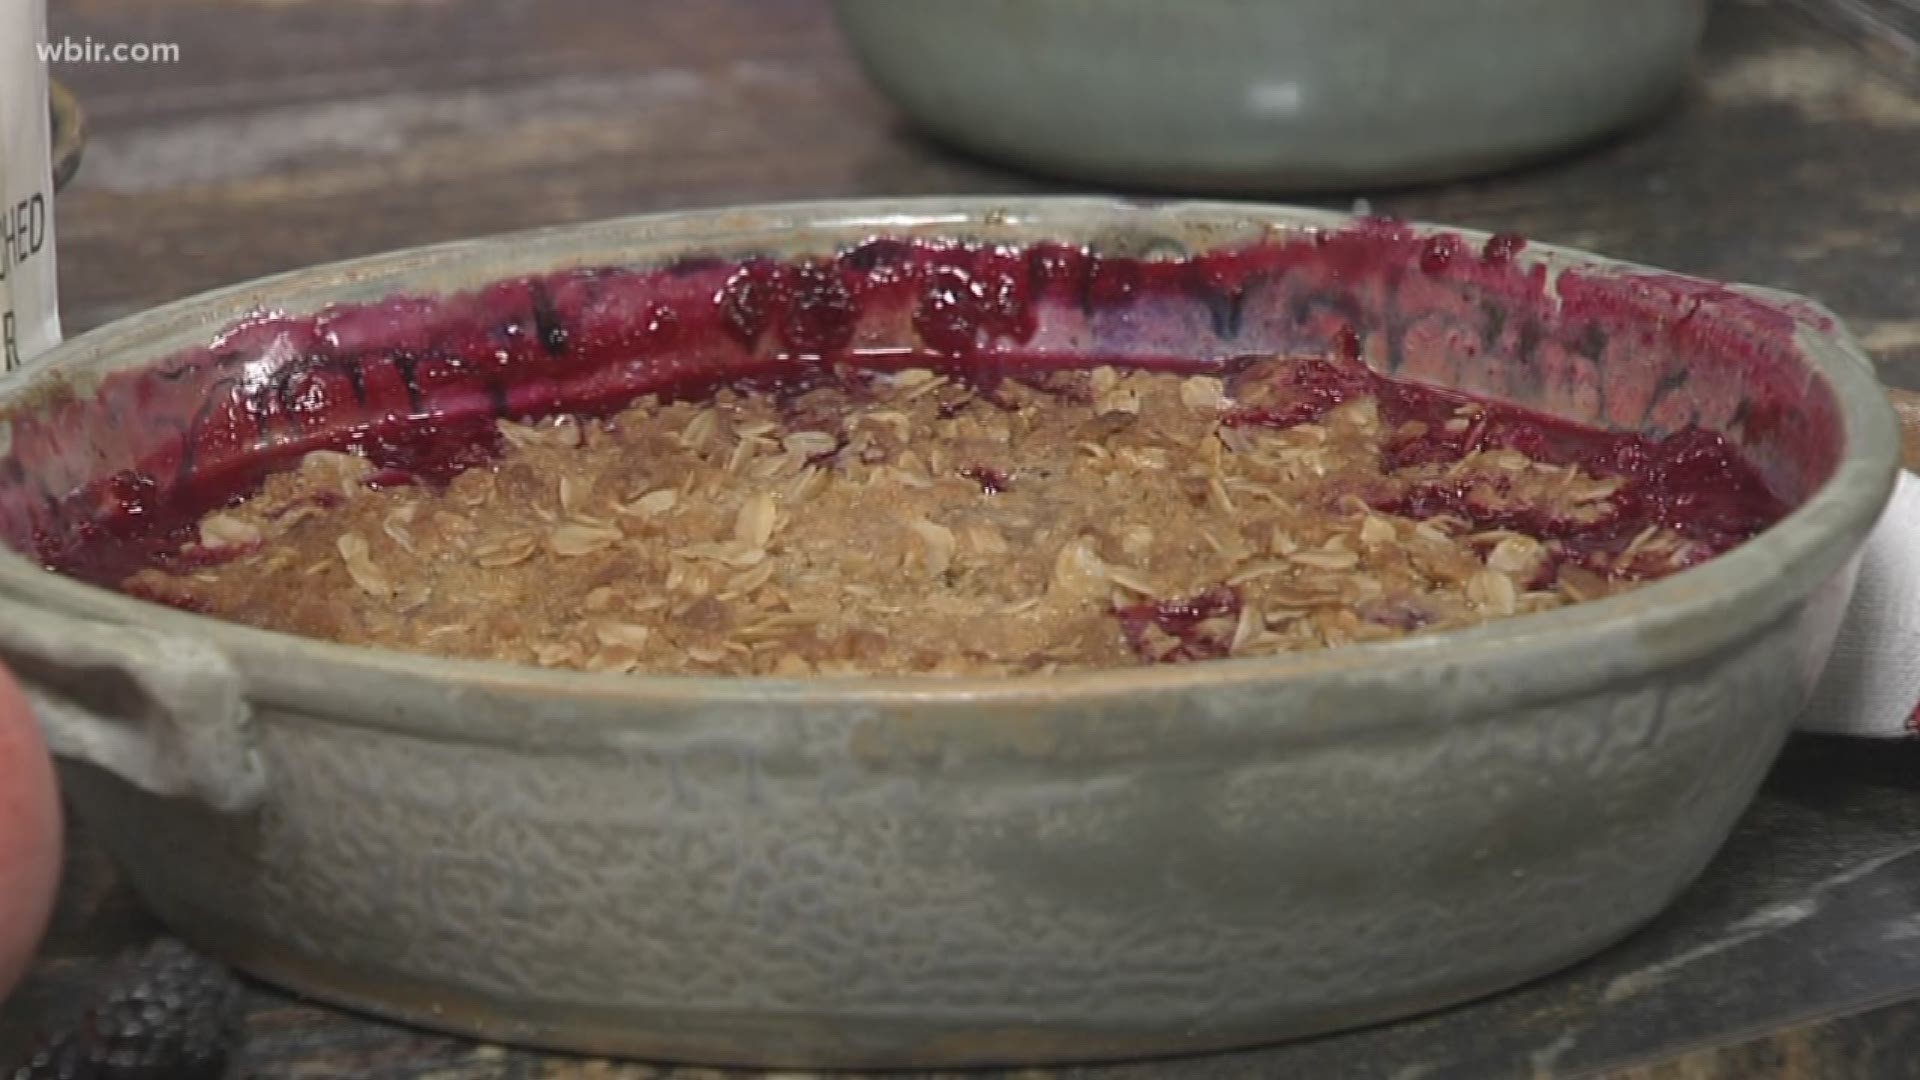 Jimmy with The Old Mill in Pigeon Forge uses some of their products to make an 
Old Fashioned Blackberry Peach Crisp. Visit old-mill.com to learn more. July 22, 2019-4pm.